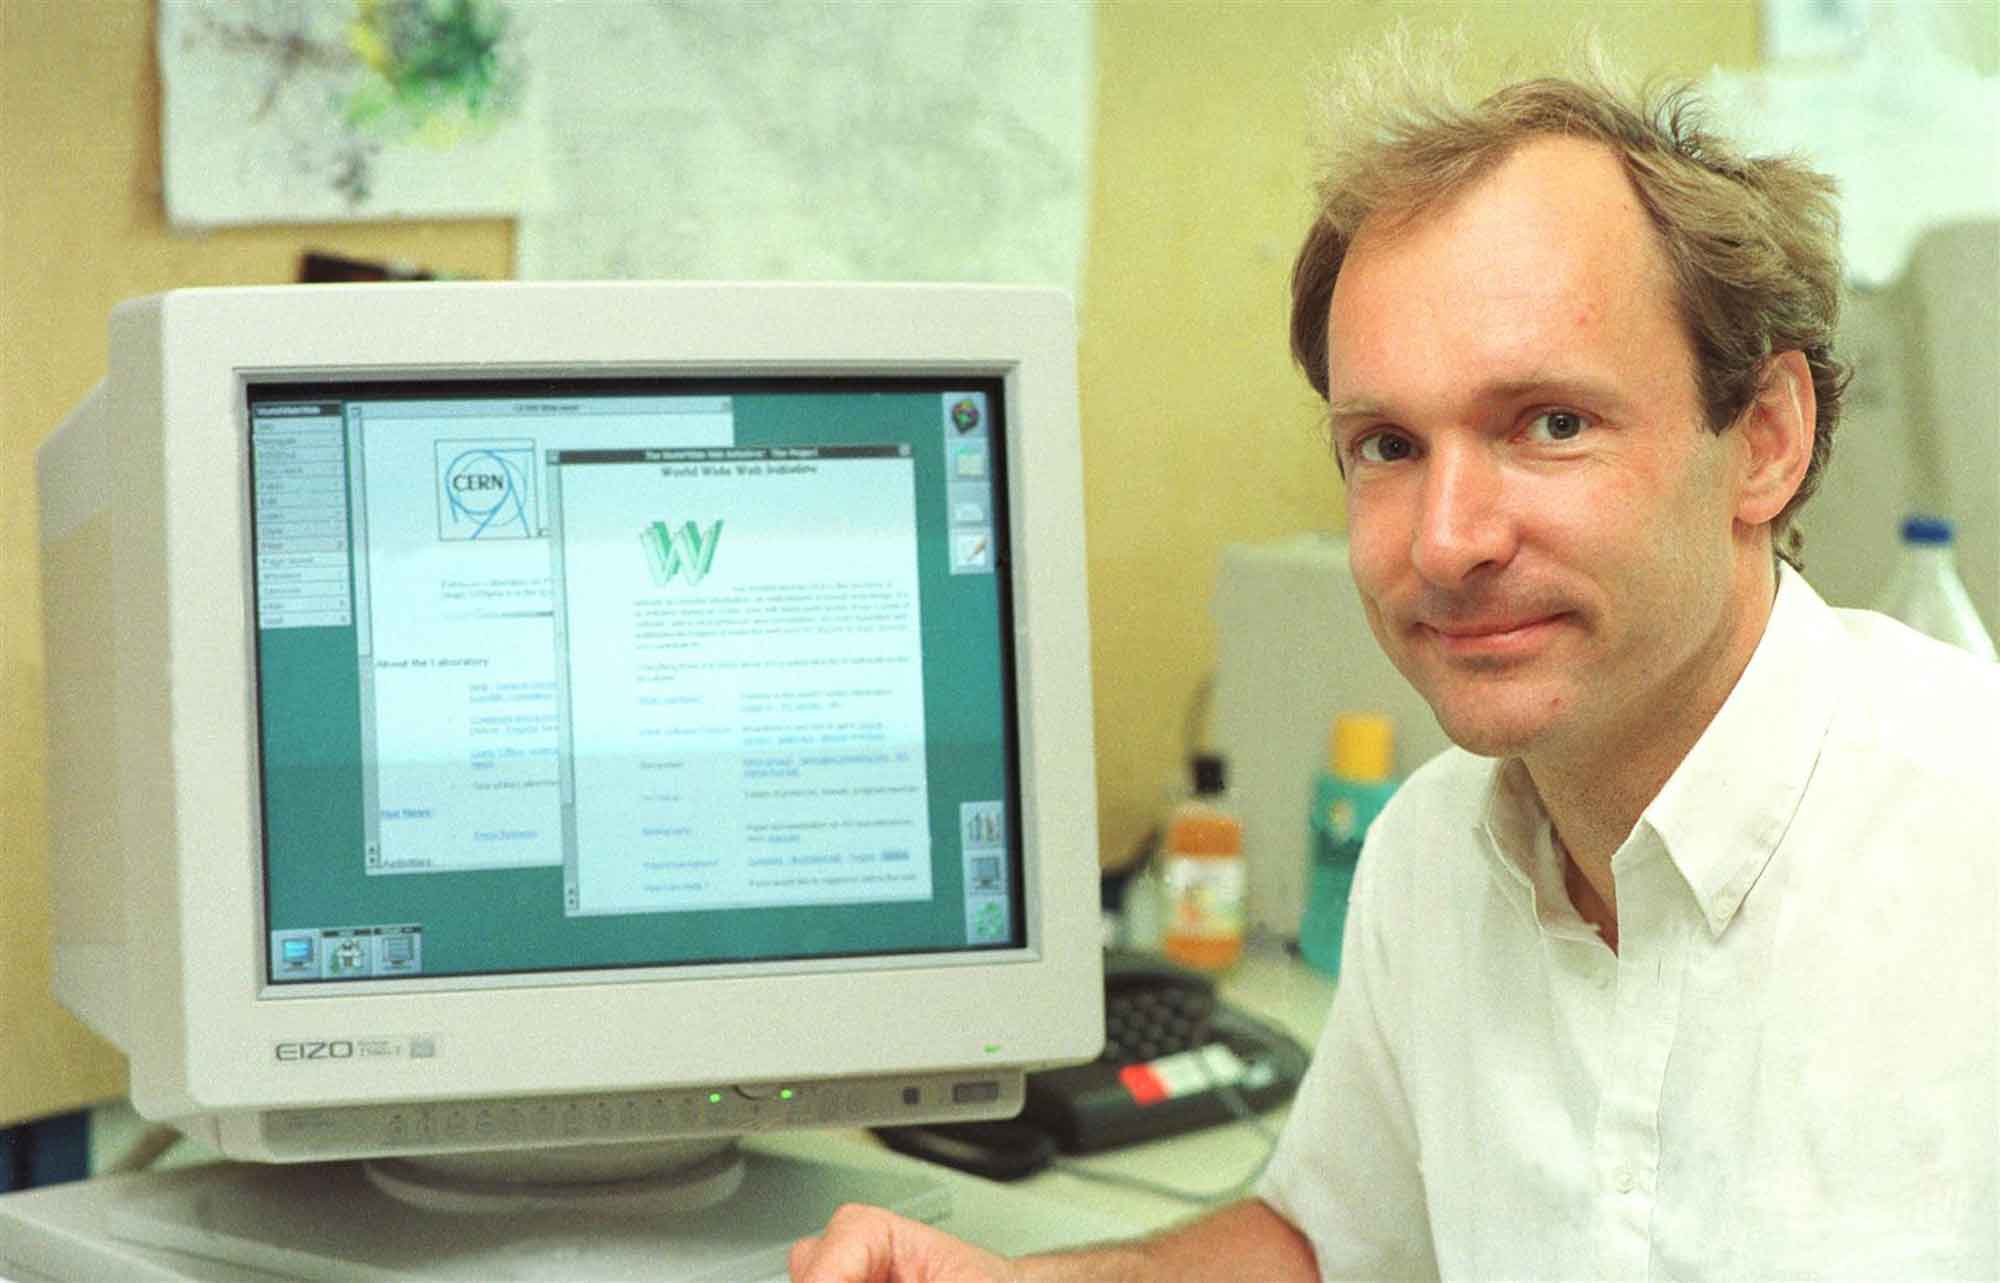 Tim Berner-Lee at CERN in 1994. An early version of World Wide Web software is running on the screen behind him (Image: CERN)